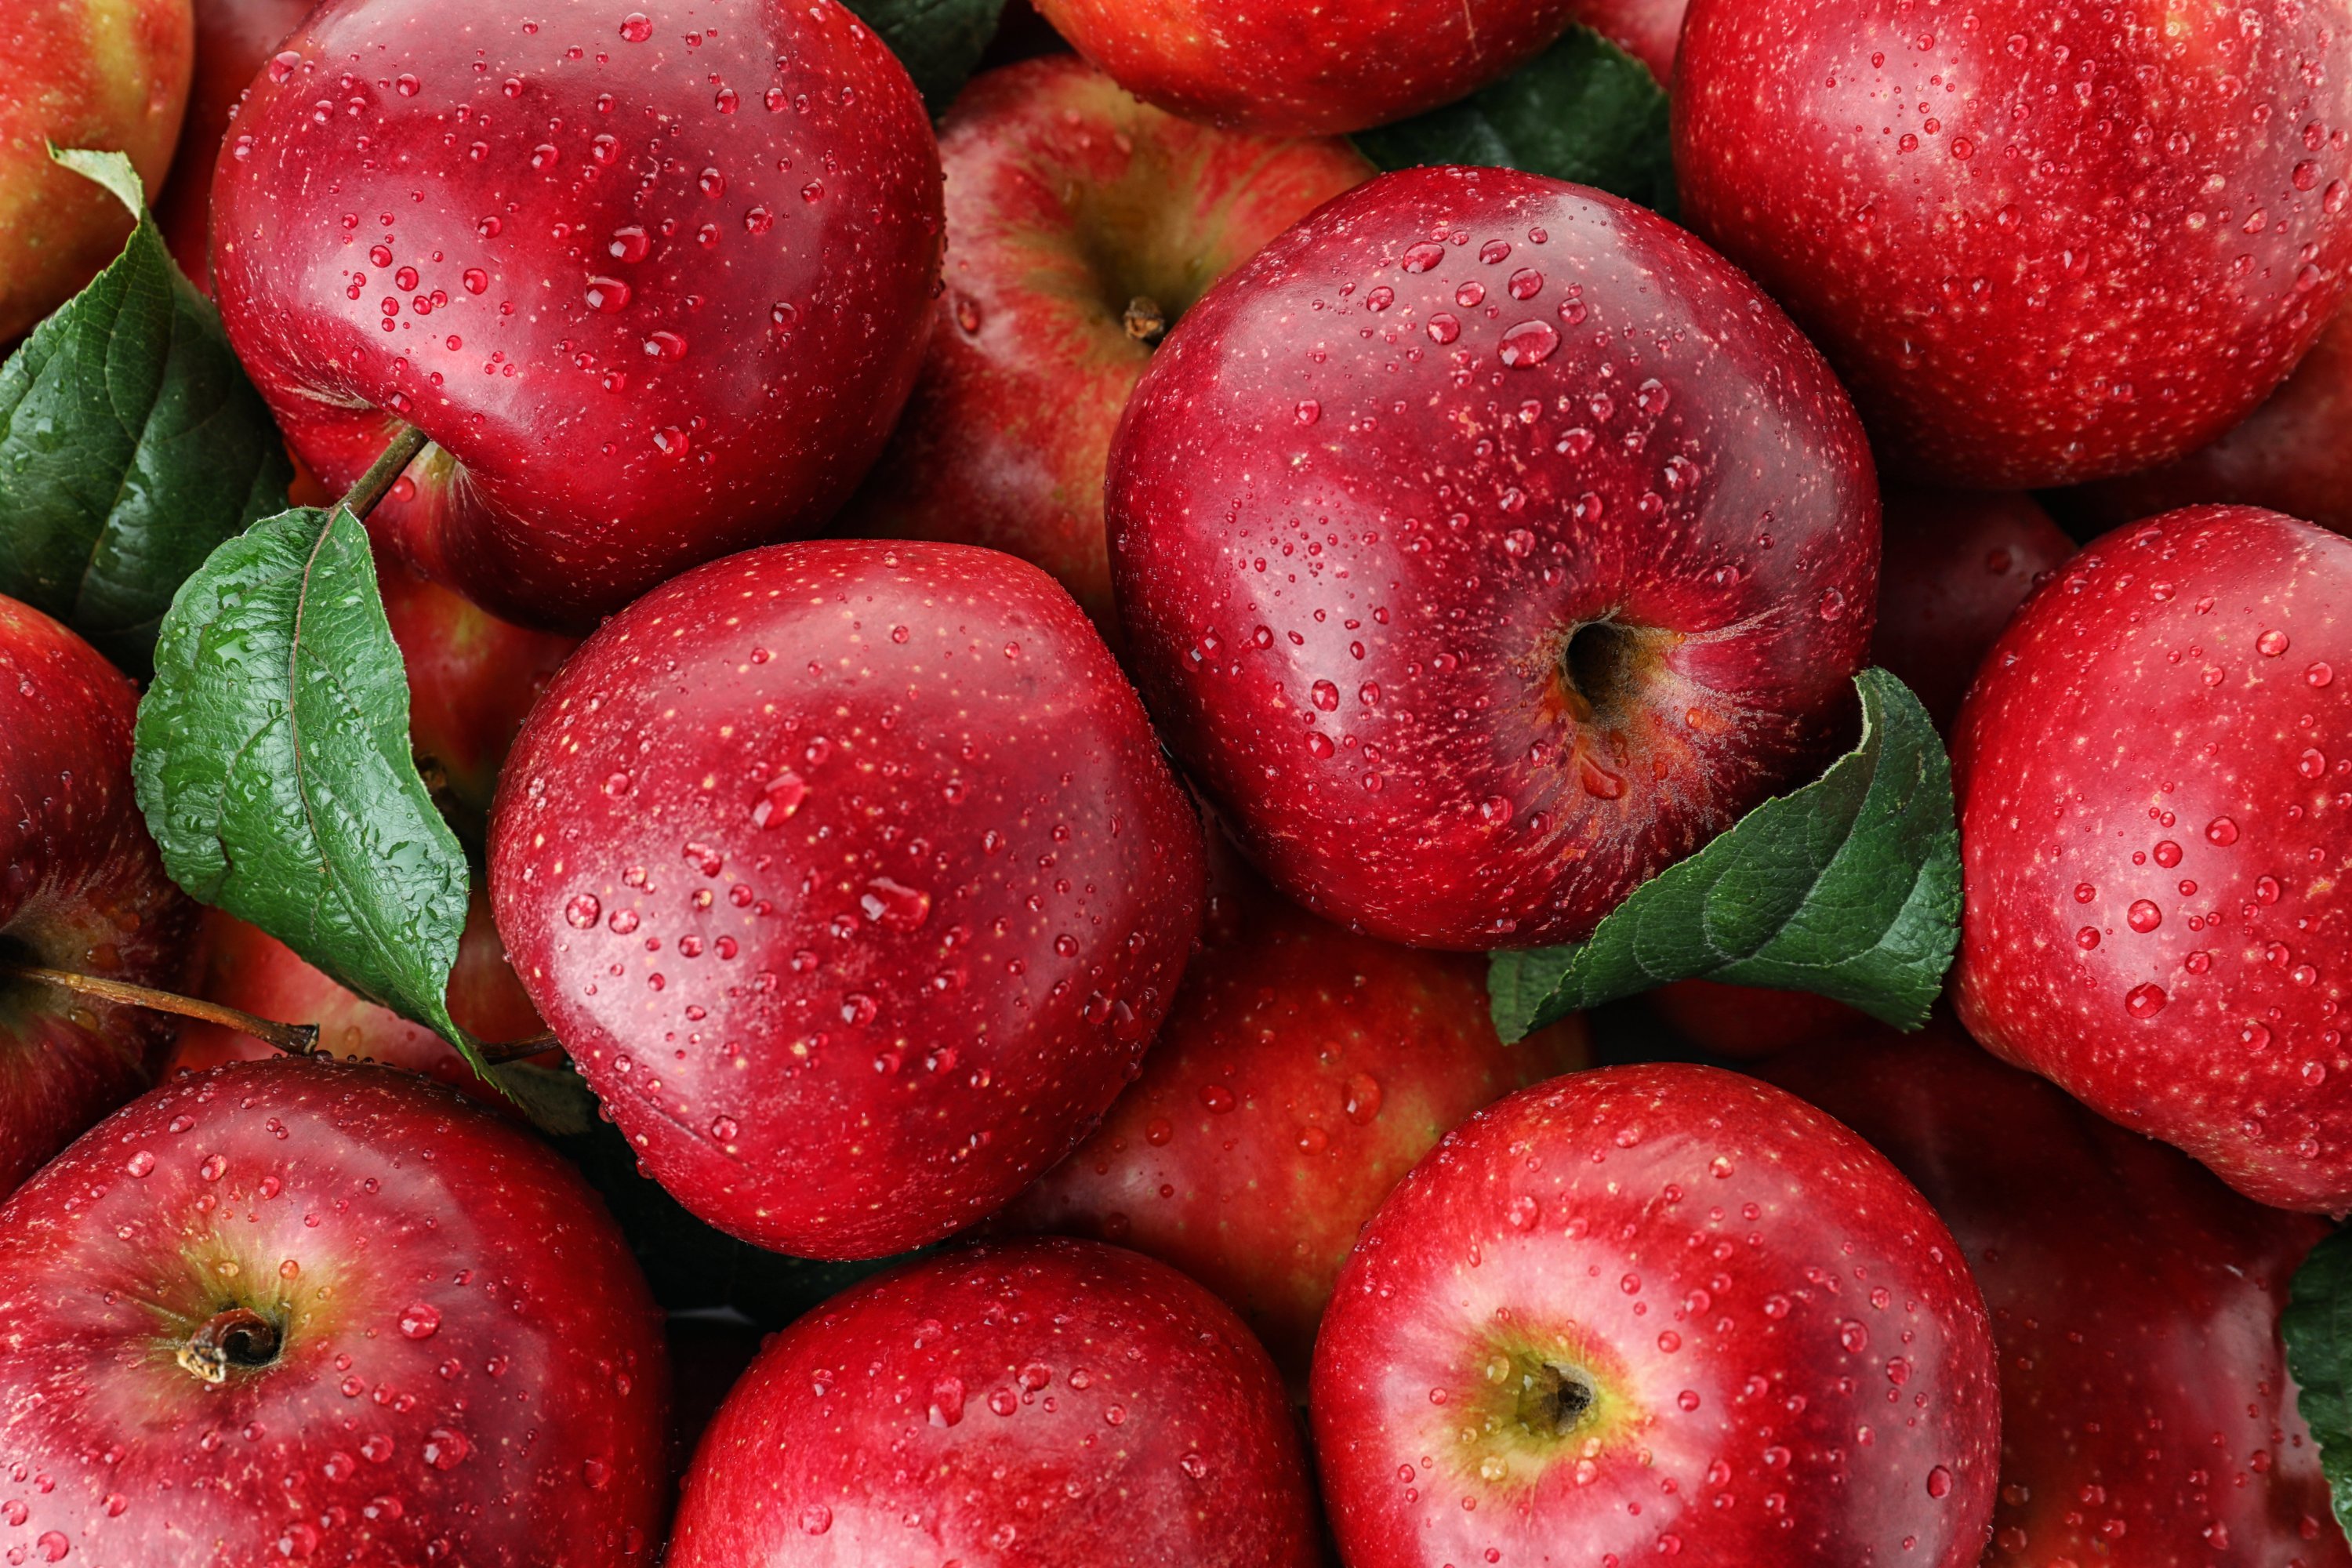 Turkish fruit producers get green light from Thailand's $210M apple market  | Daily Sabah